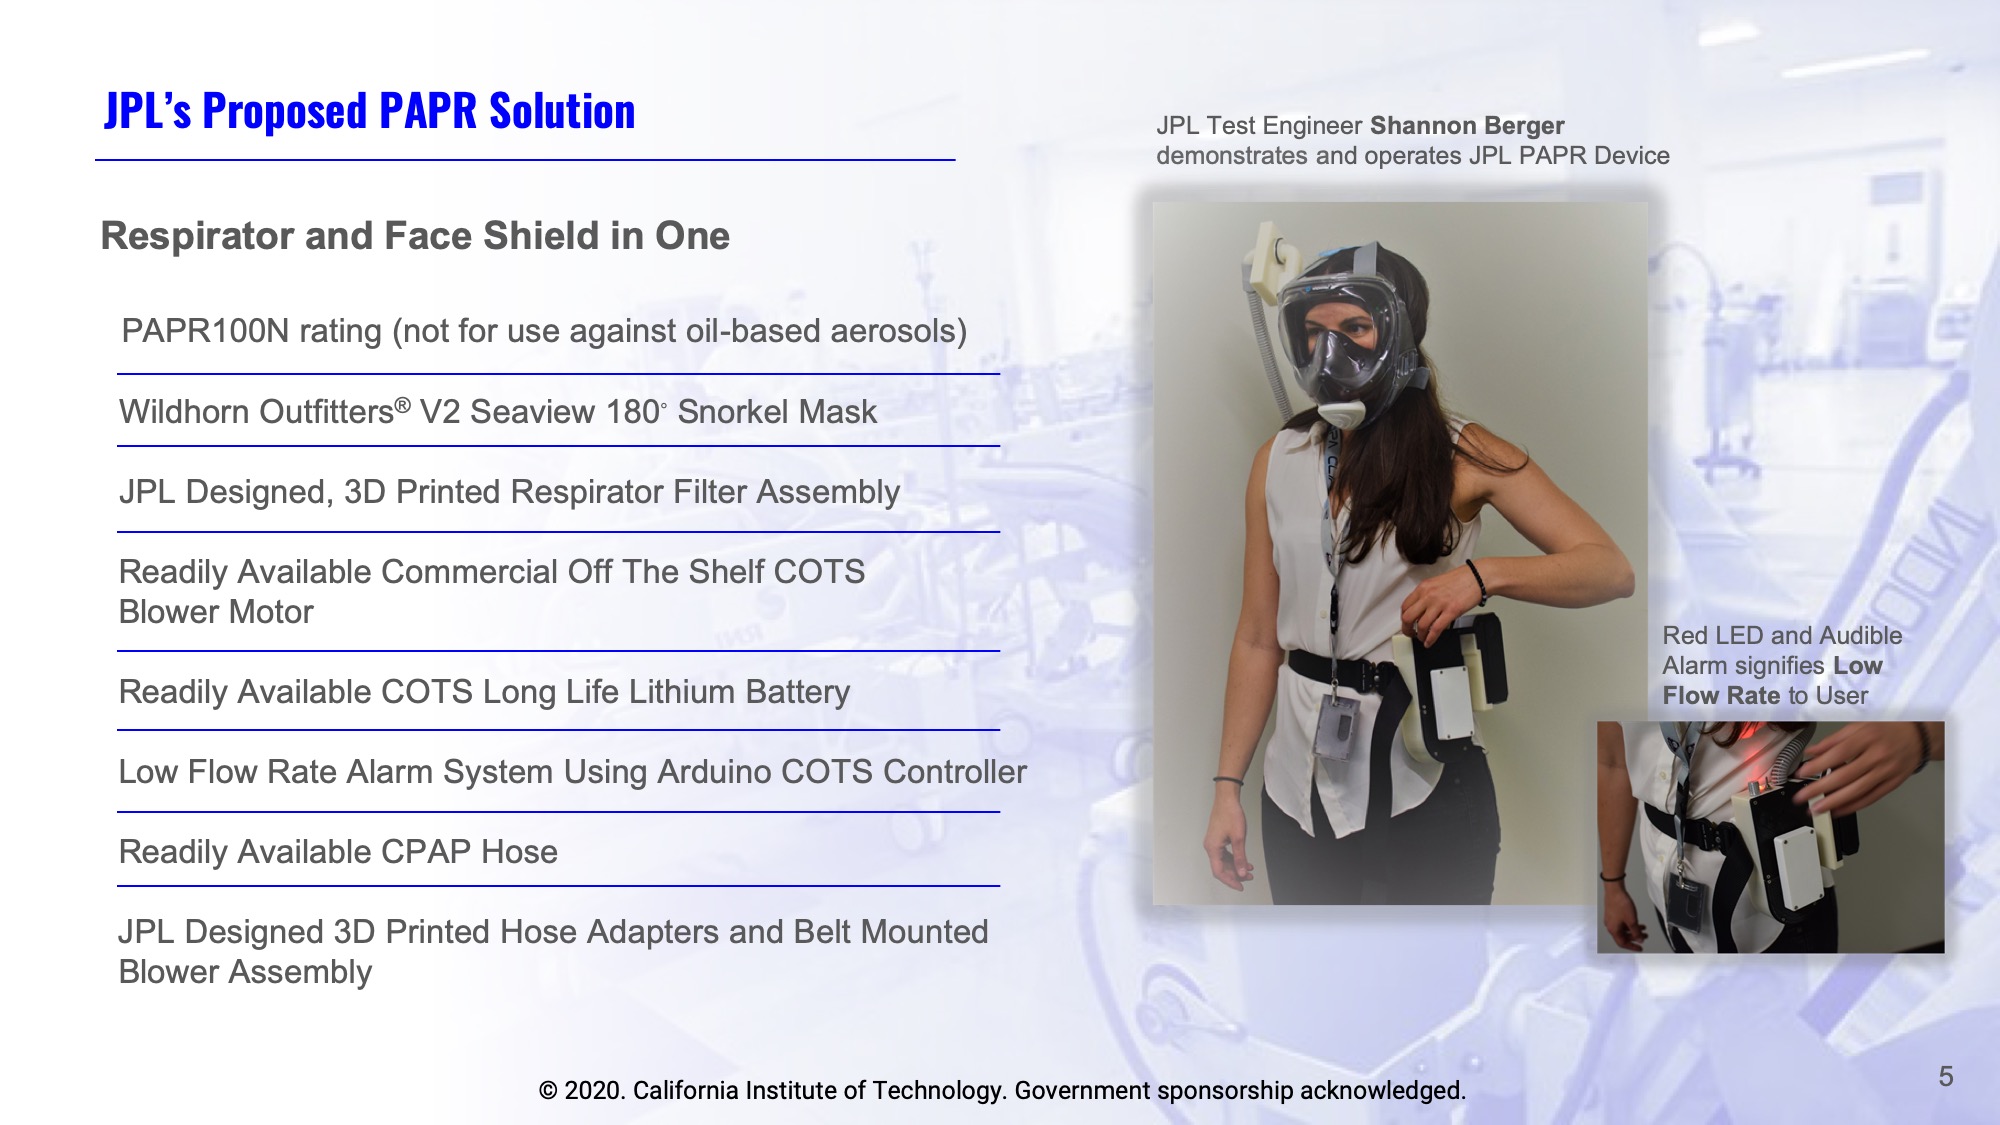 Slide 5: JPL’s Proposed PAPR Solution:  - Respirator and Face Shield in One - PAPR100N rating (not for use against oil-based aerosols) - Wildhorn Outfitters® V2 Seaview 180◦ Snorkel Mask - JPL Designed, 3D Printed Respirator Filter Assembly - Readily Available Commercial Off The Shelf COTS Blower Motor  - Readily Available COTS Long Life Lithium Battery - Low Flow Rate Alarm System Using Arduino COTS Controller - Readily Available CPAP Hose - JPL Designed 3D Printed Hose Adapters and Belt Mounted Blower Assembly. Photo of JPL Test Engineer Shannon Berger demonstrating and operating JPL PAPR Device.  Photo caption Red LED and Audible Alarm signifies Low Flow Rate to User